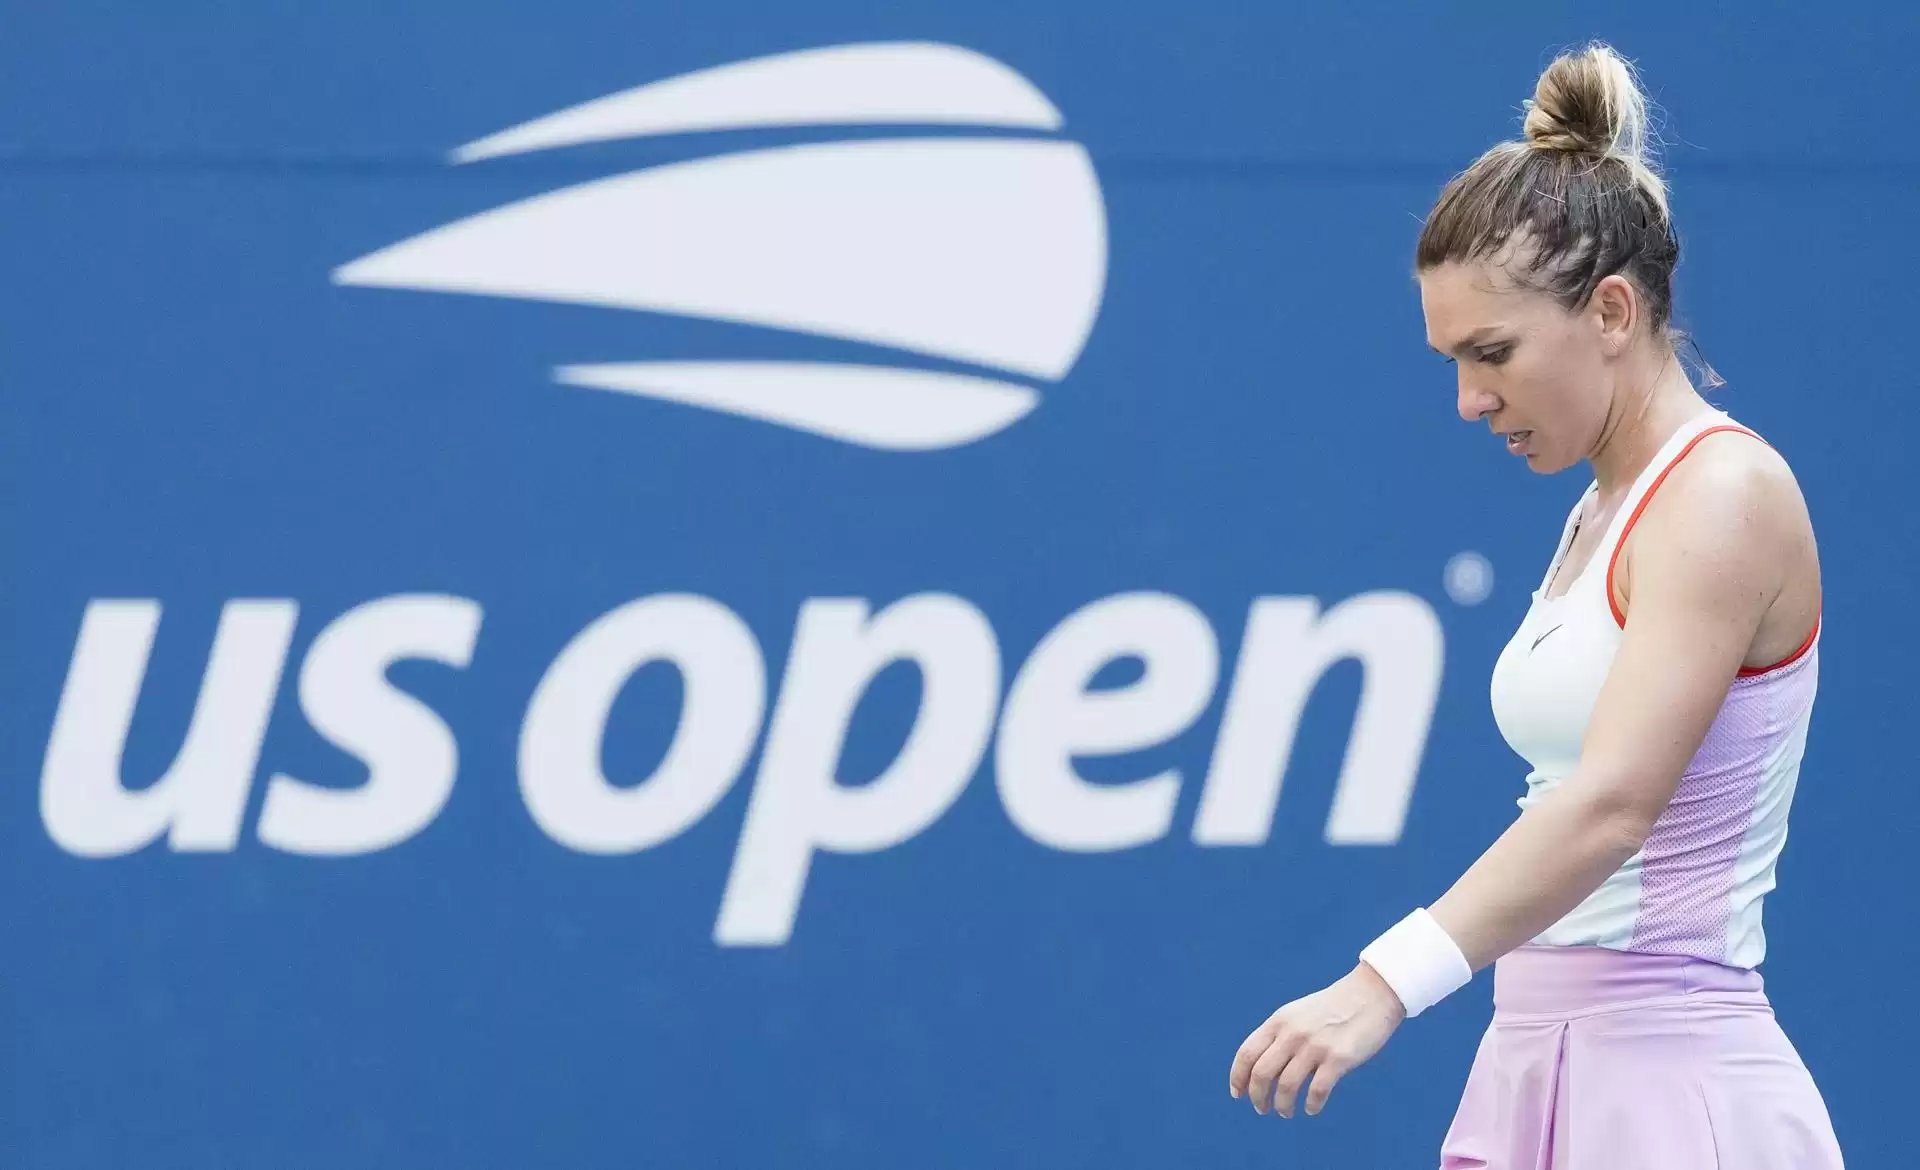 Former number 1 Simona Halep suspended 4 years for anti-doping violations